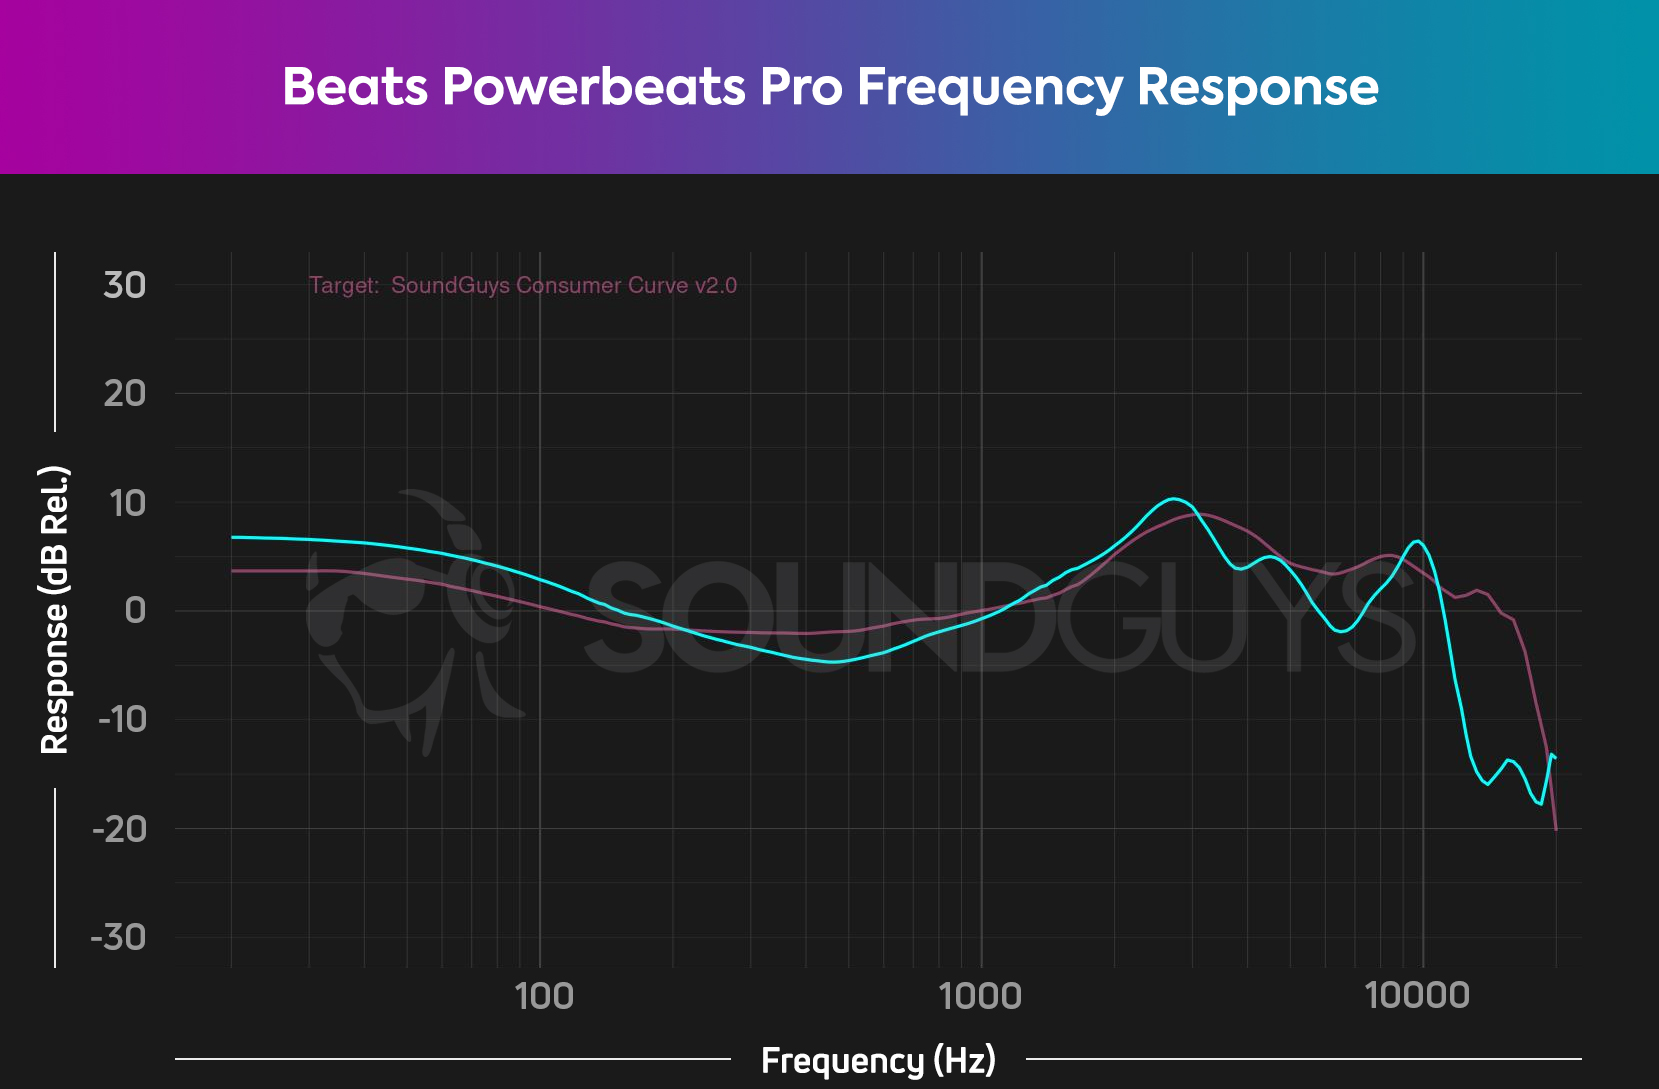 Chart of Beats Powerbeats Pro frequency response compared to our ideal curve.